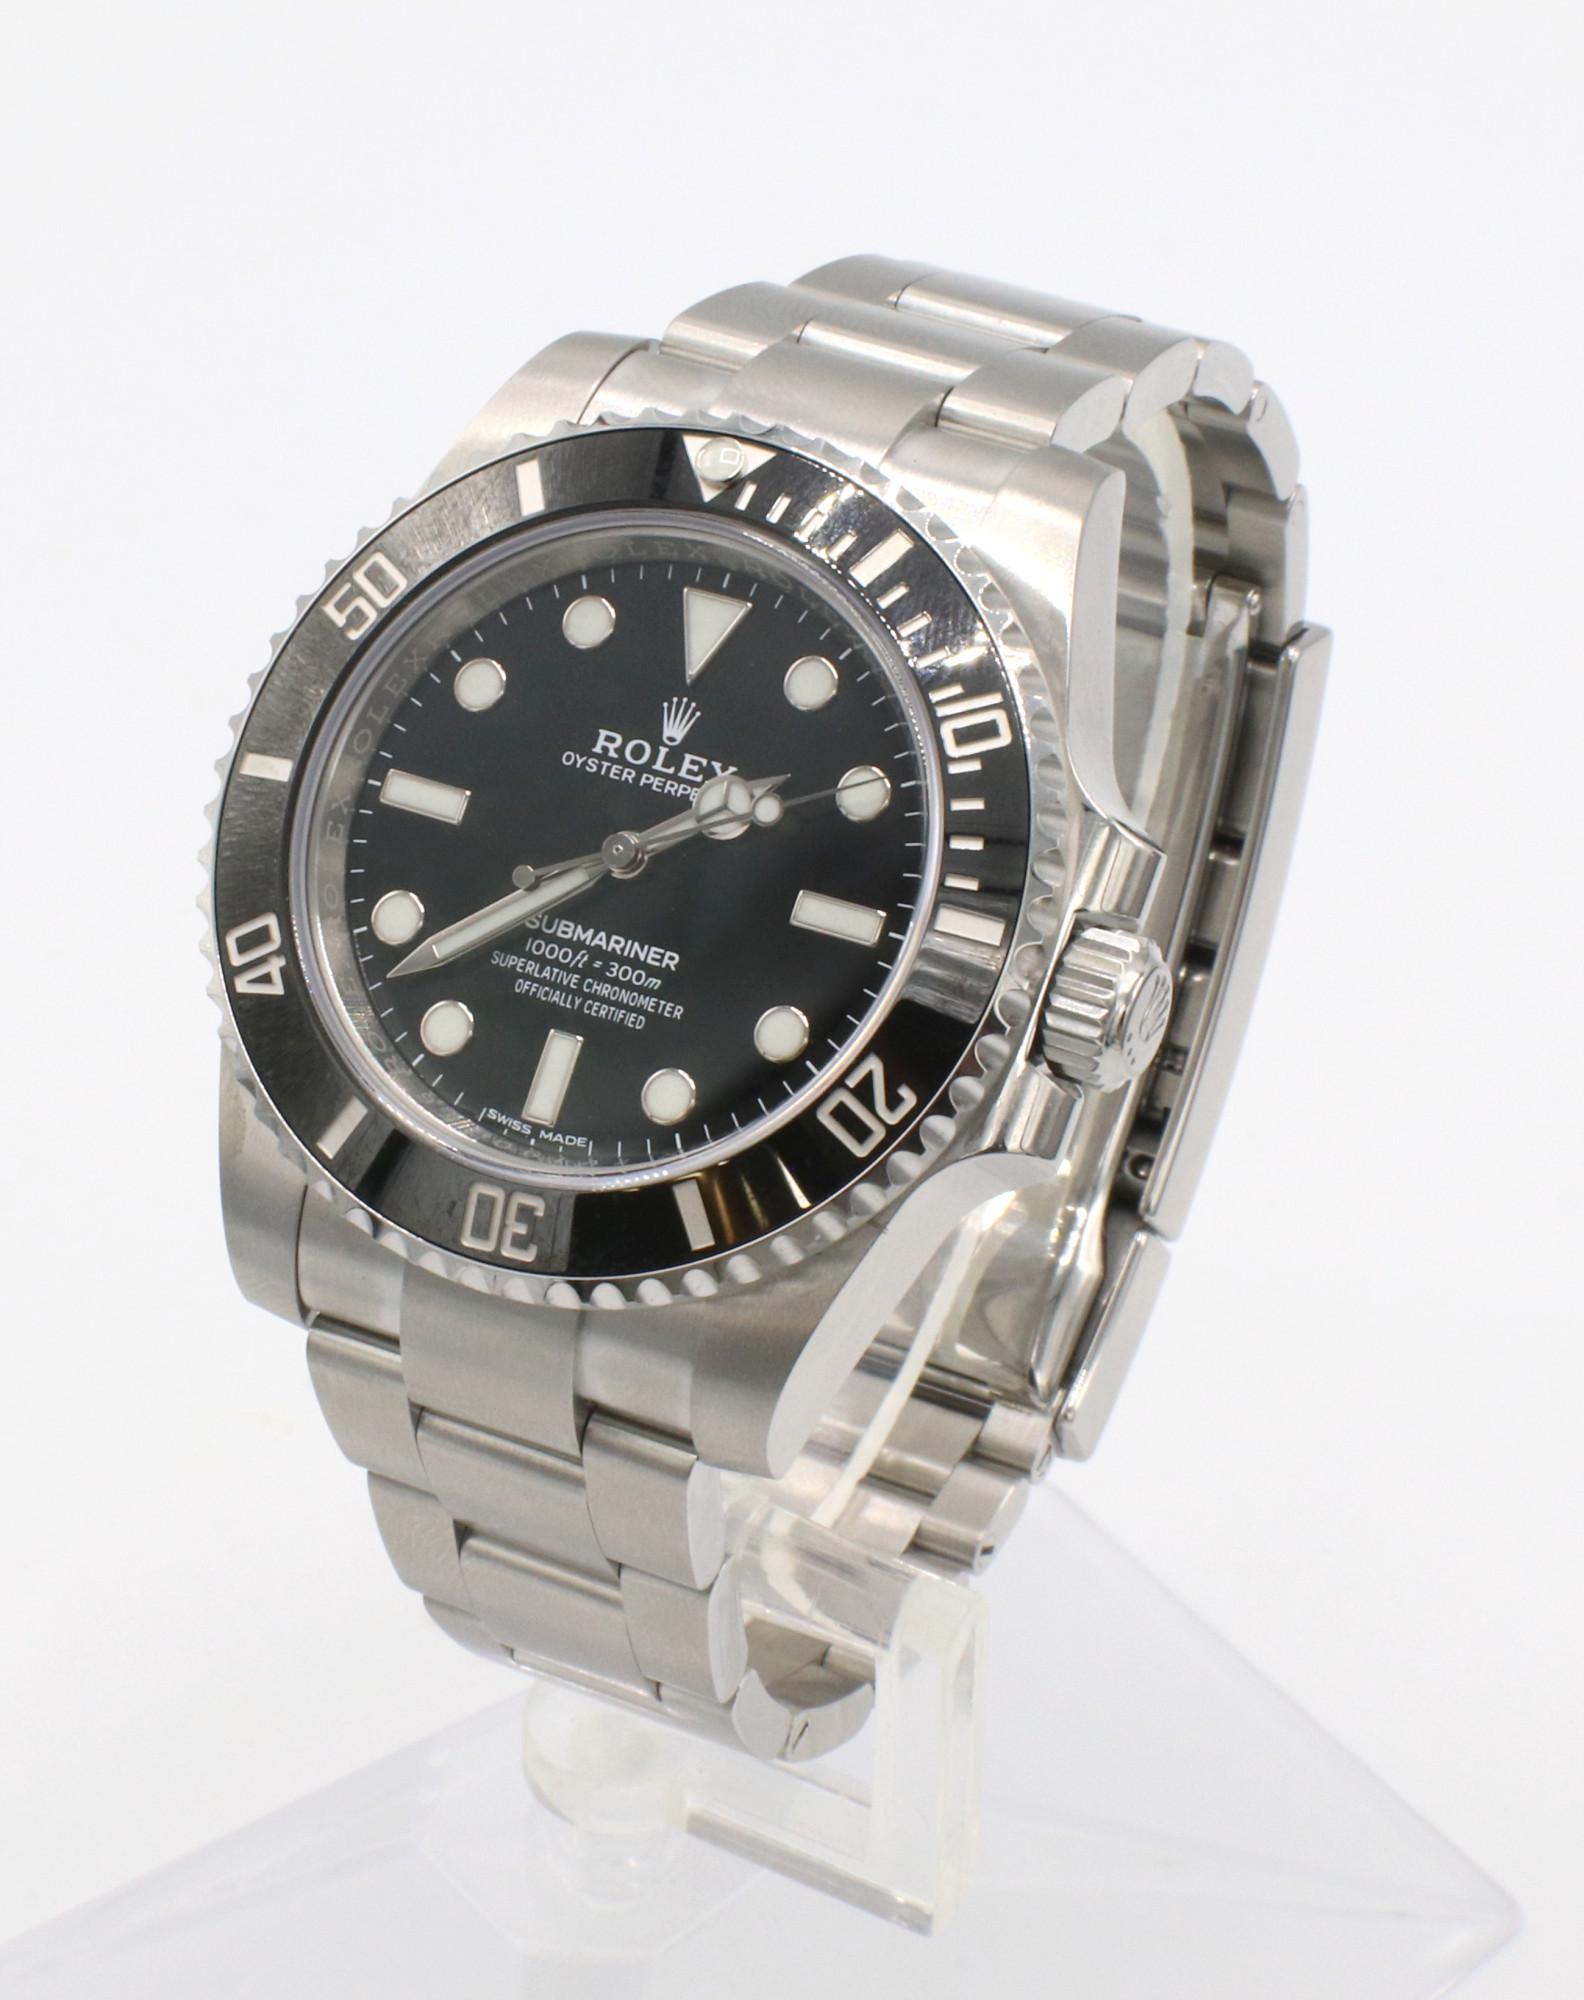 Rolex Submariner Stainless Steel No Date Reference 114060 Watch
Model: 114060
Serial: 7V19**** (Card dated 6/16/2020)
Case: 40mm
Bracelet: Stainless steel oyster, 11 links
Crystal: Sapphire
Movement: Automatic
Notes: Box & Papers